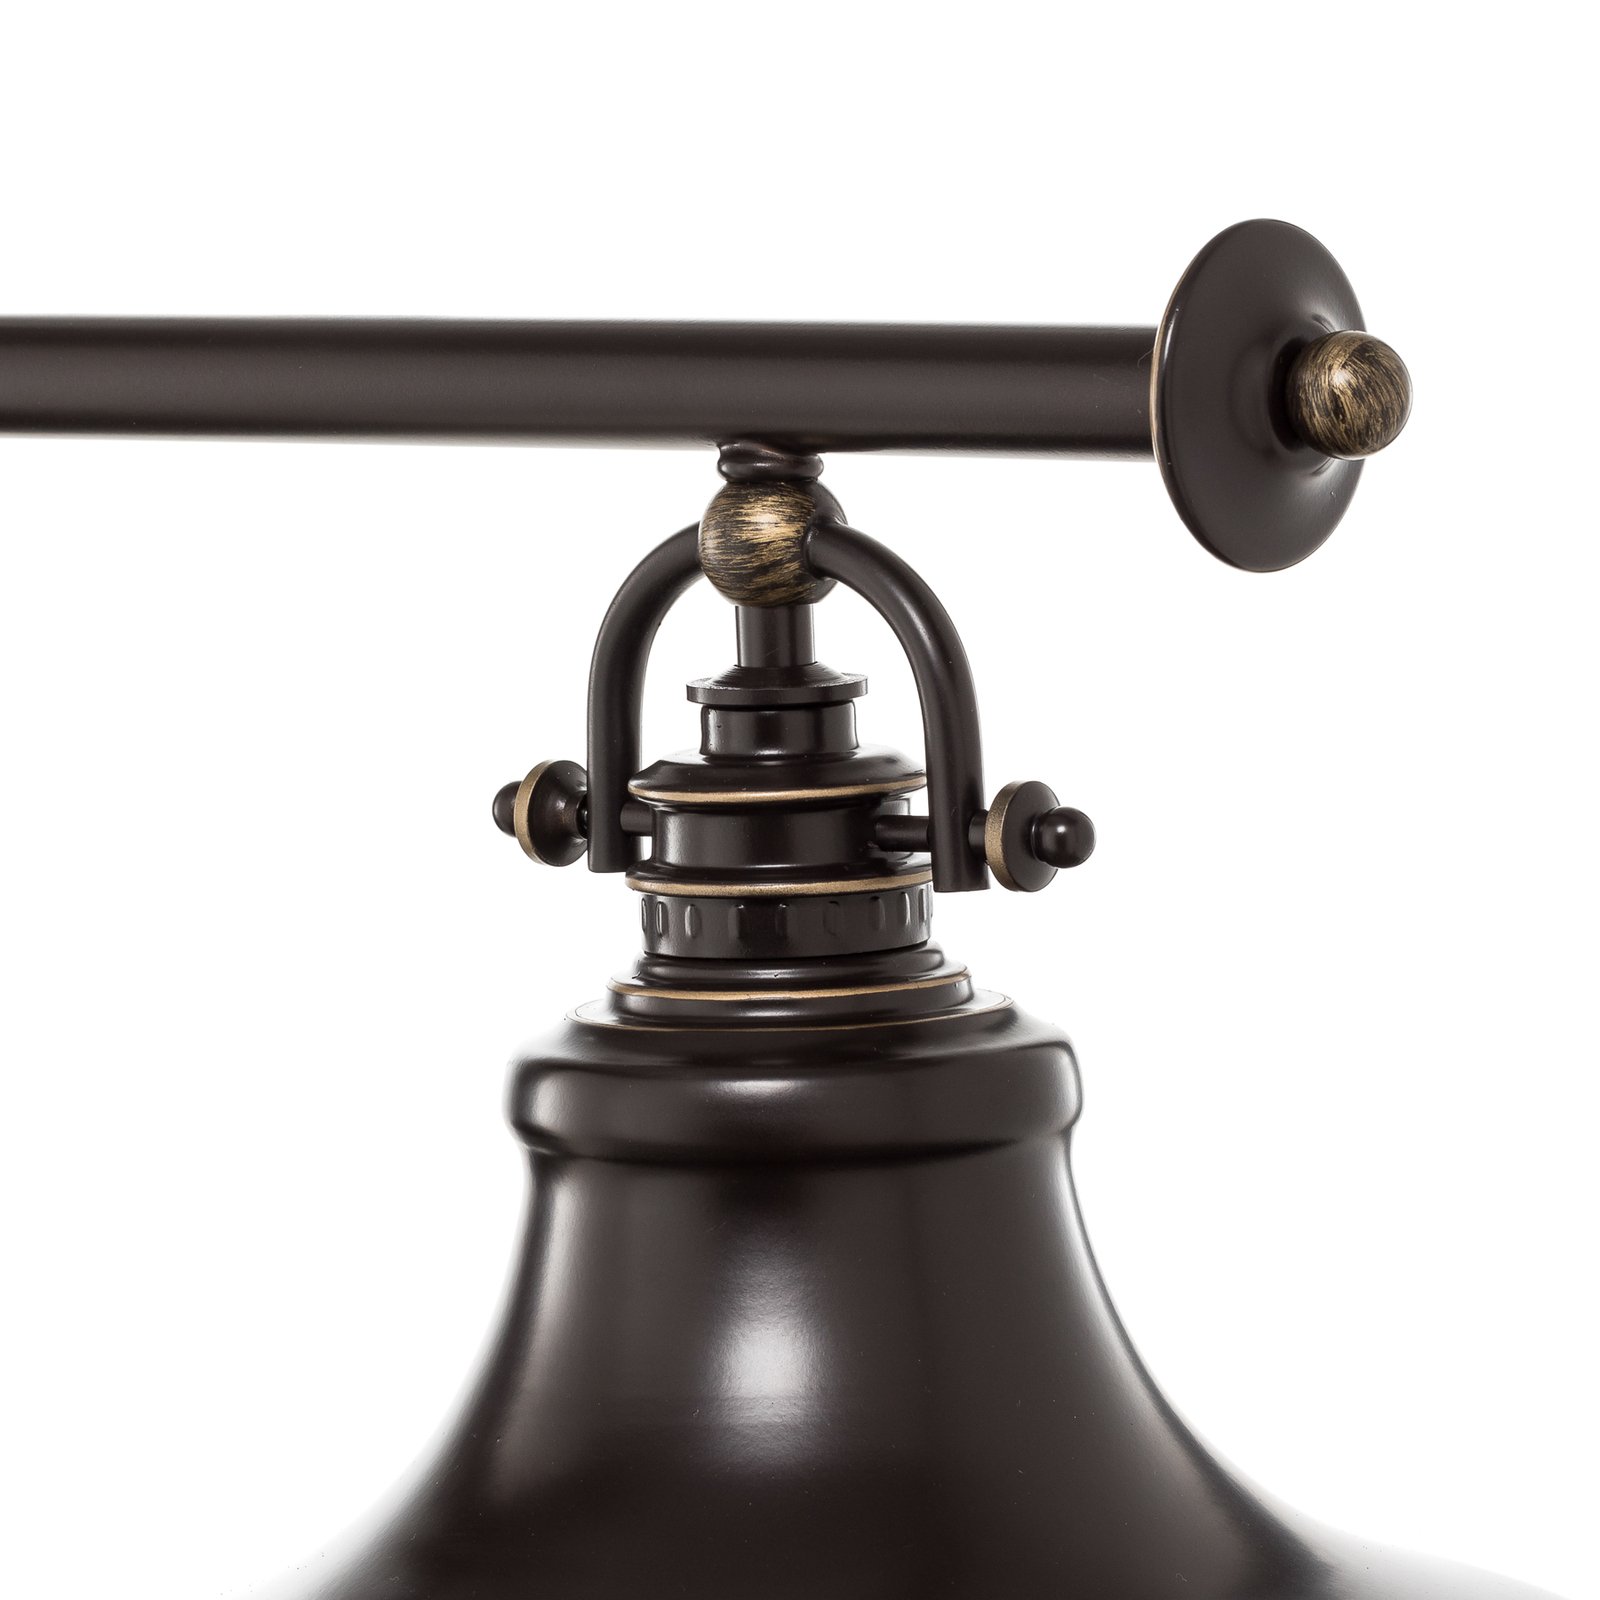 Suspension Emery style industriel bronze 3 lampes